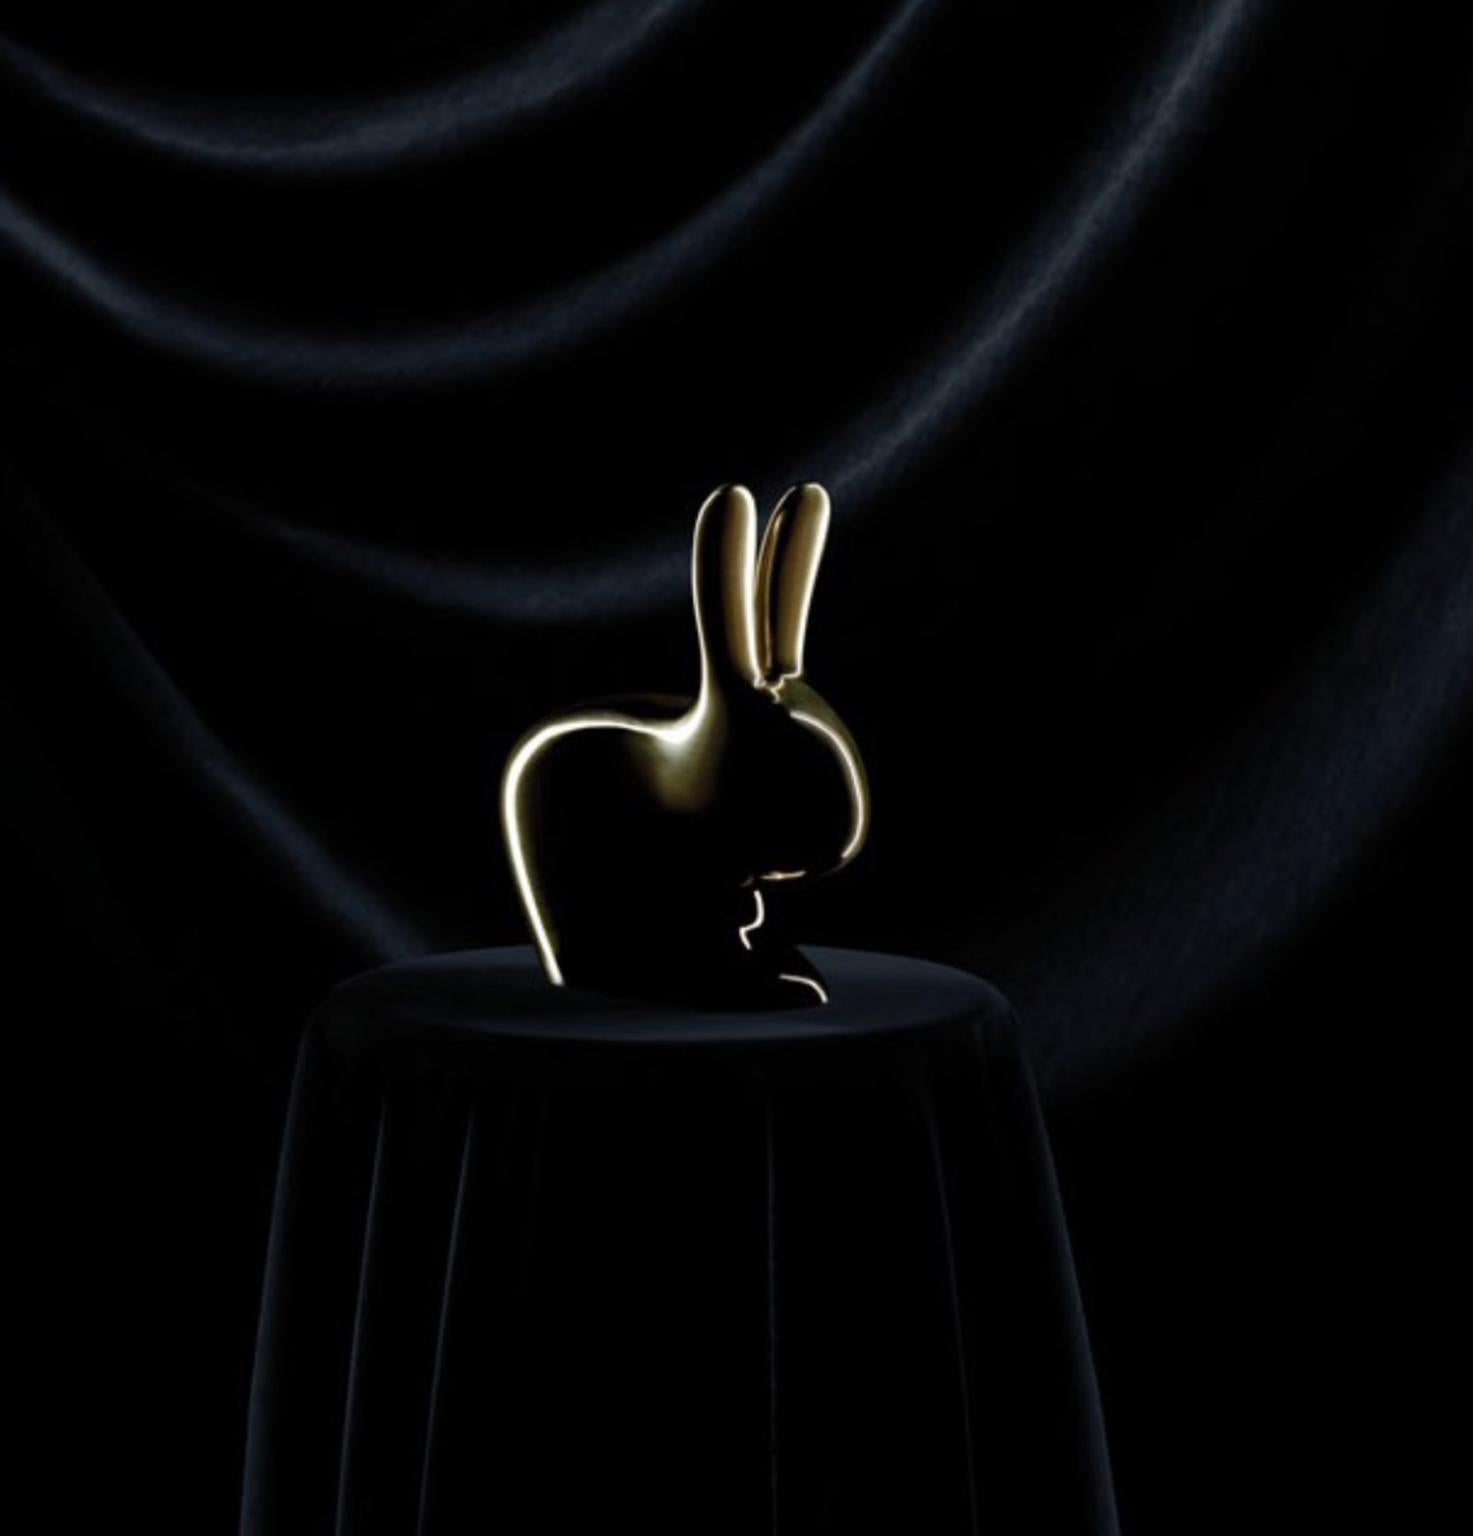 This is the latest iconic object designed by Stefano Giovannoni, for Ghidini 1961. An Italian contemporary design factory. Its designers: Campana Brothers, Mendini, Studio Job and more other archistars.
This figurative sculpture is a rabbit, a